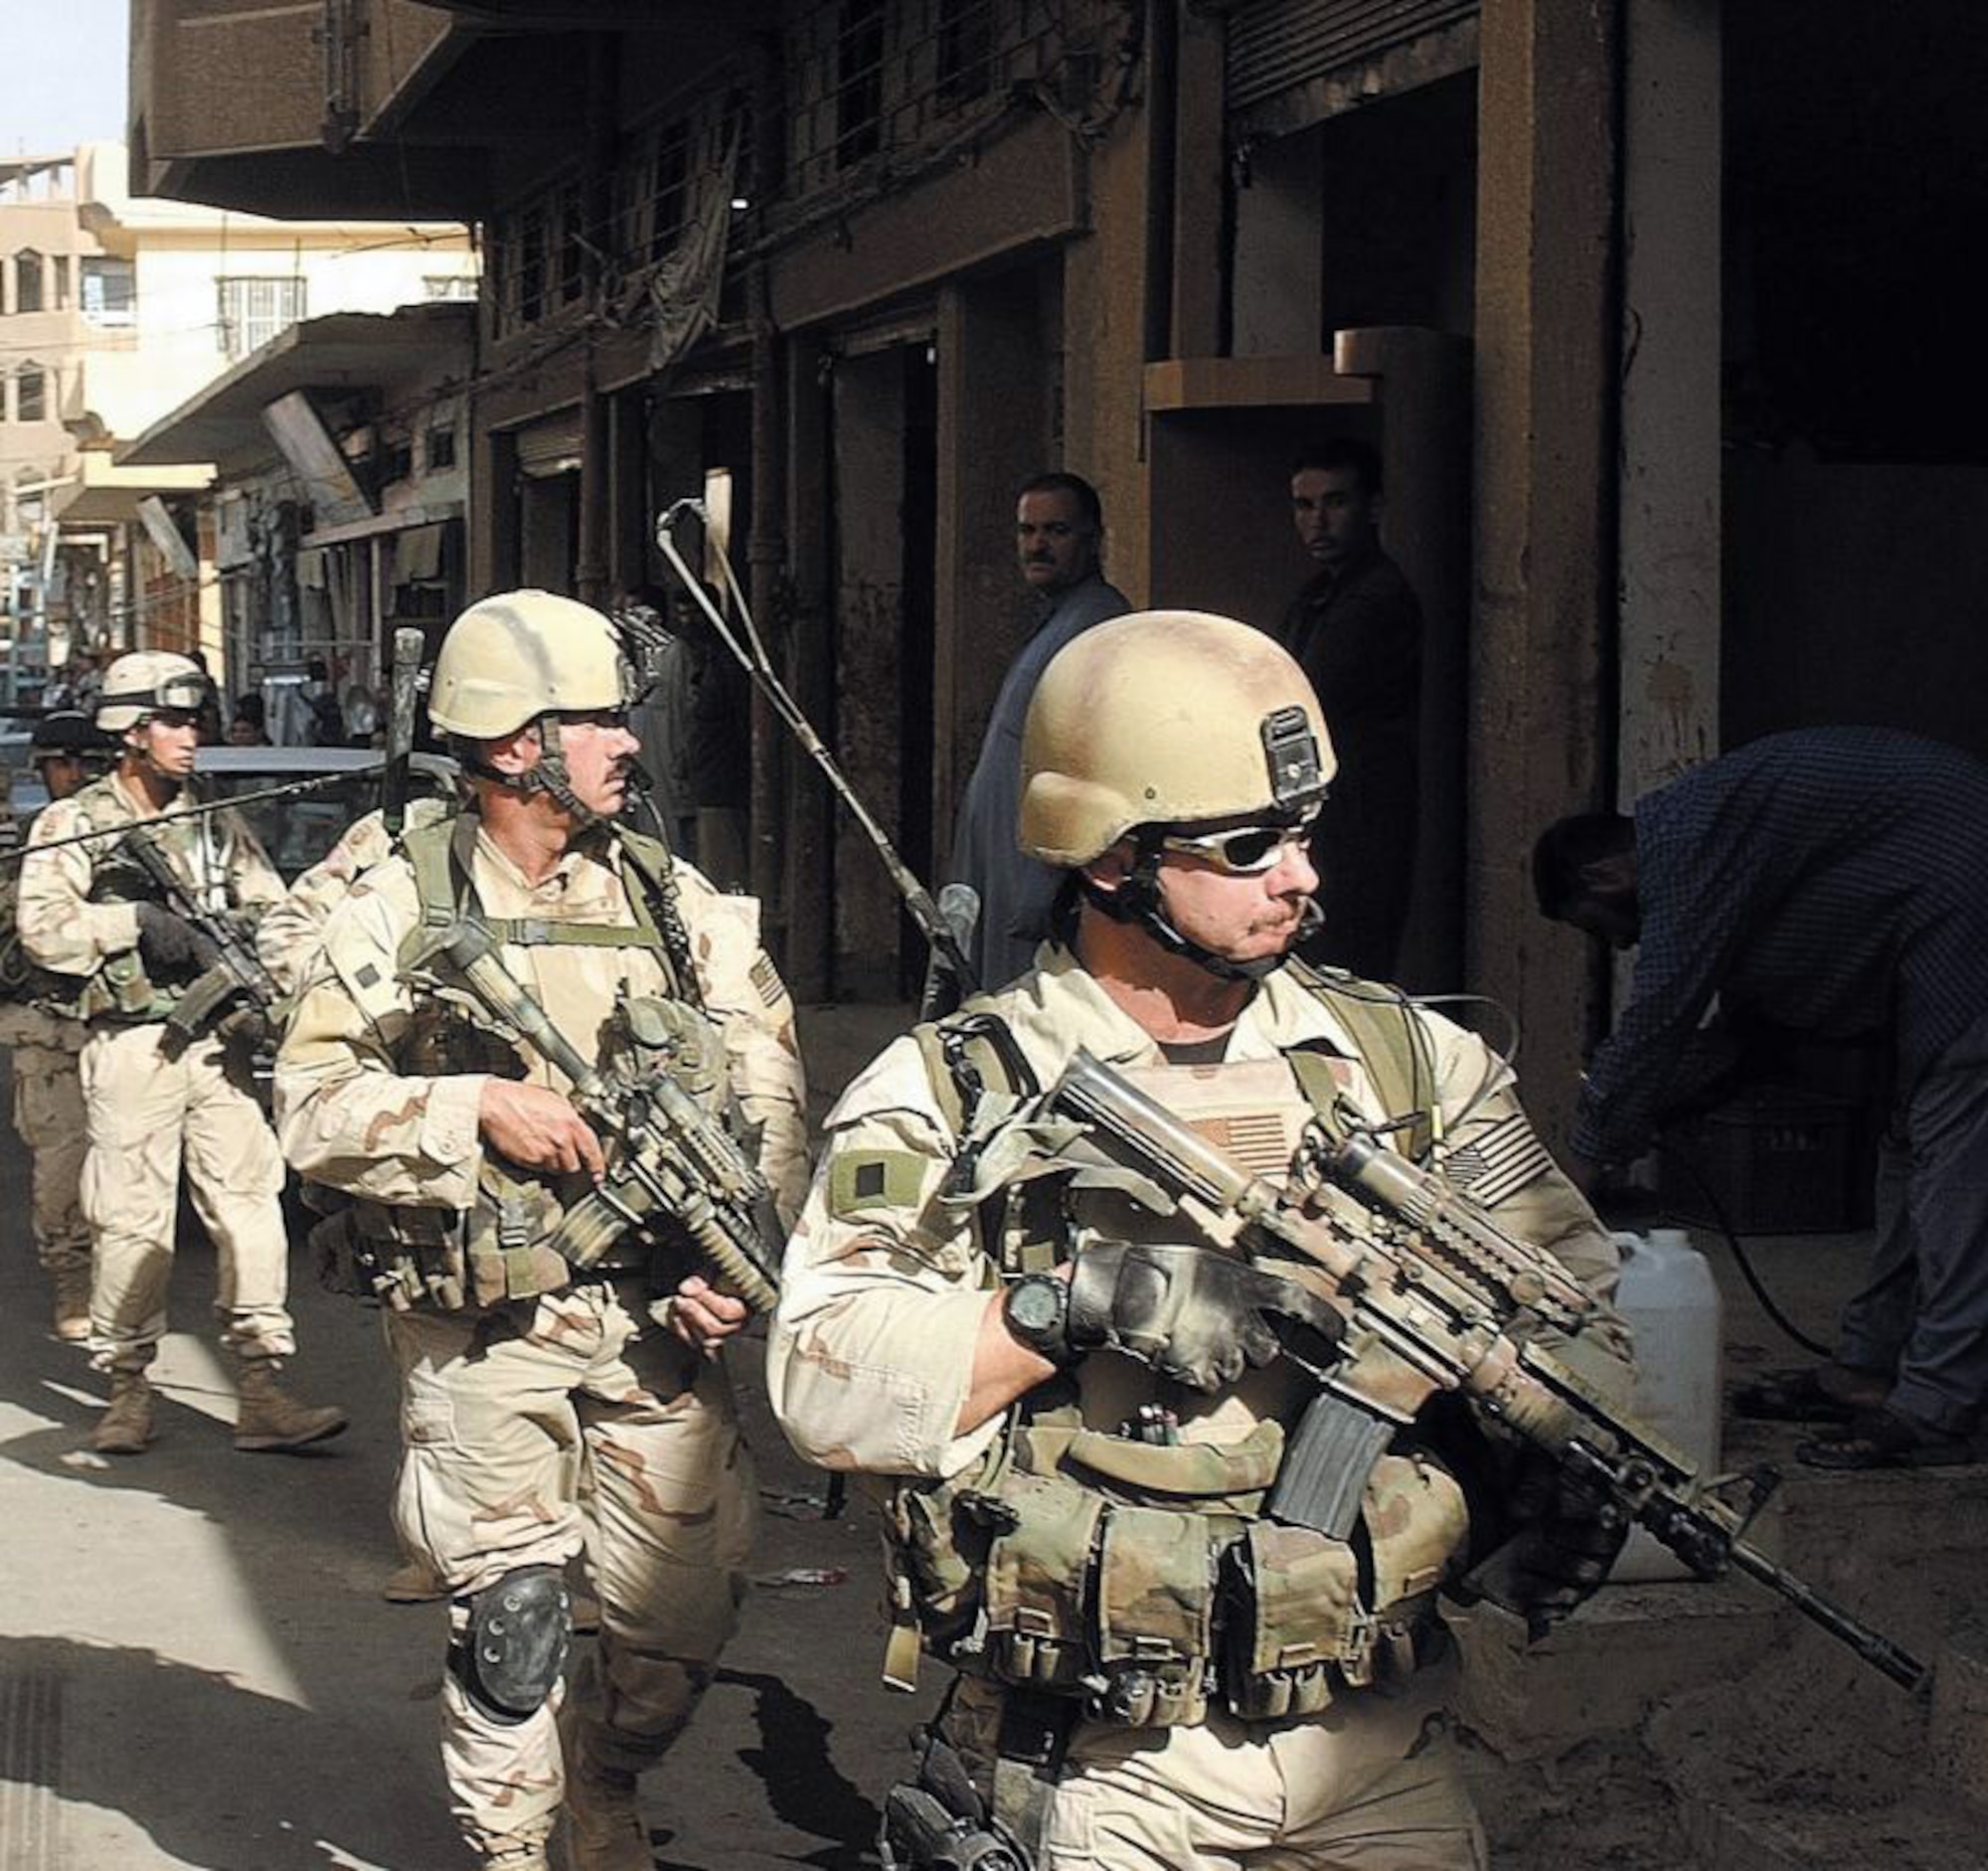 Enlisted tactical air controllers from the 14th Air Support Operations Squadron accompany the Army's 82nd Airborne Division on a foot patrol through an arms market in Iraq. (U.S. Air Force photo/14th Air Support Operations Squadron) 